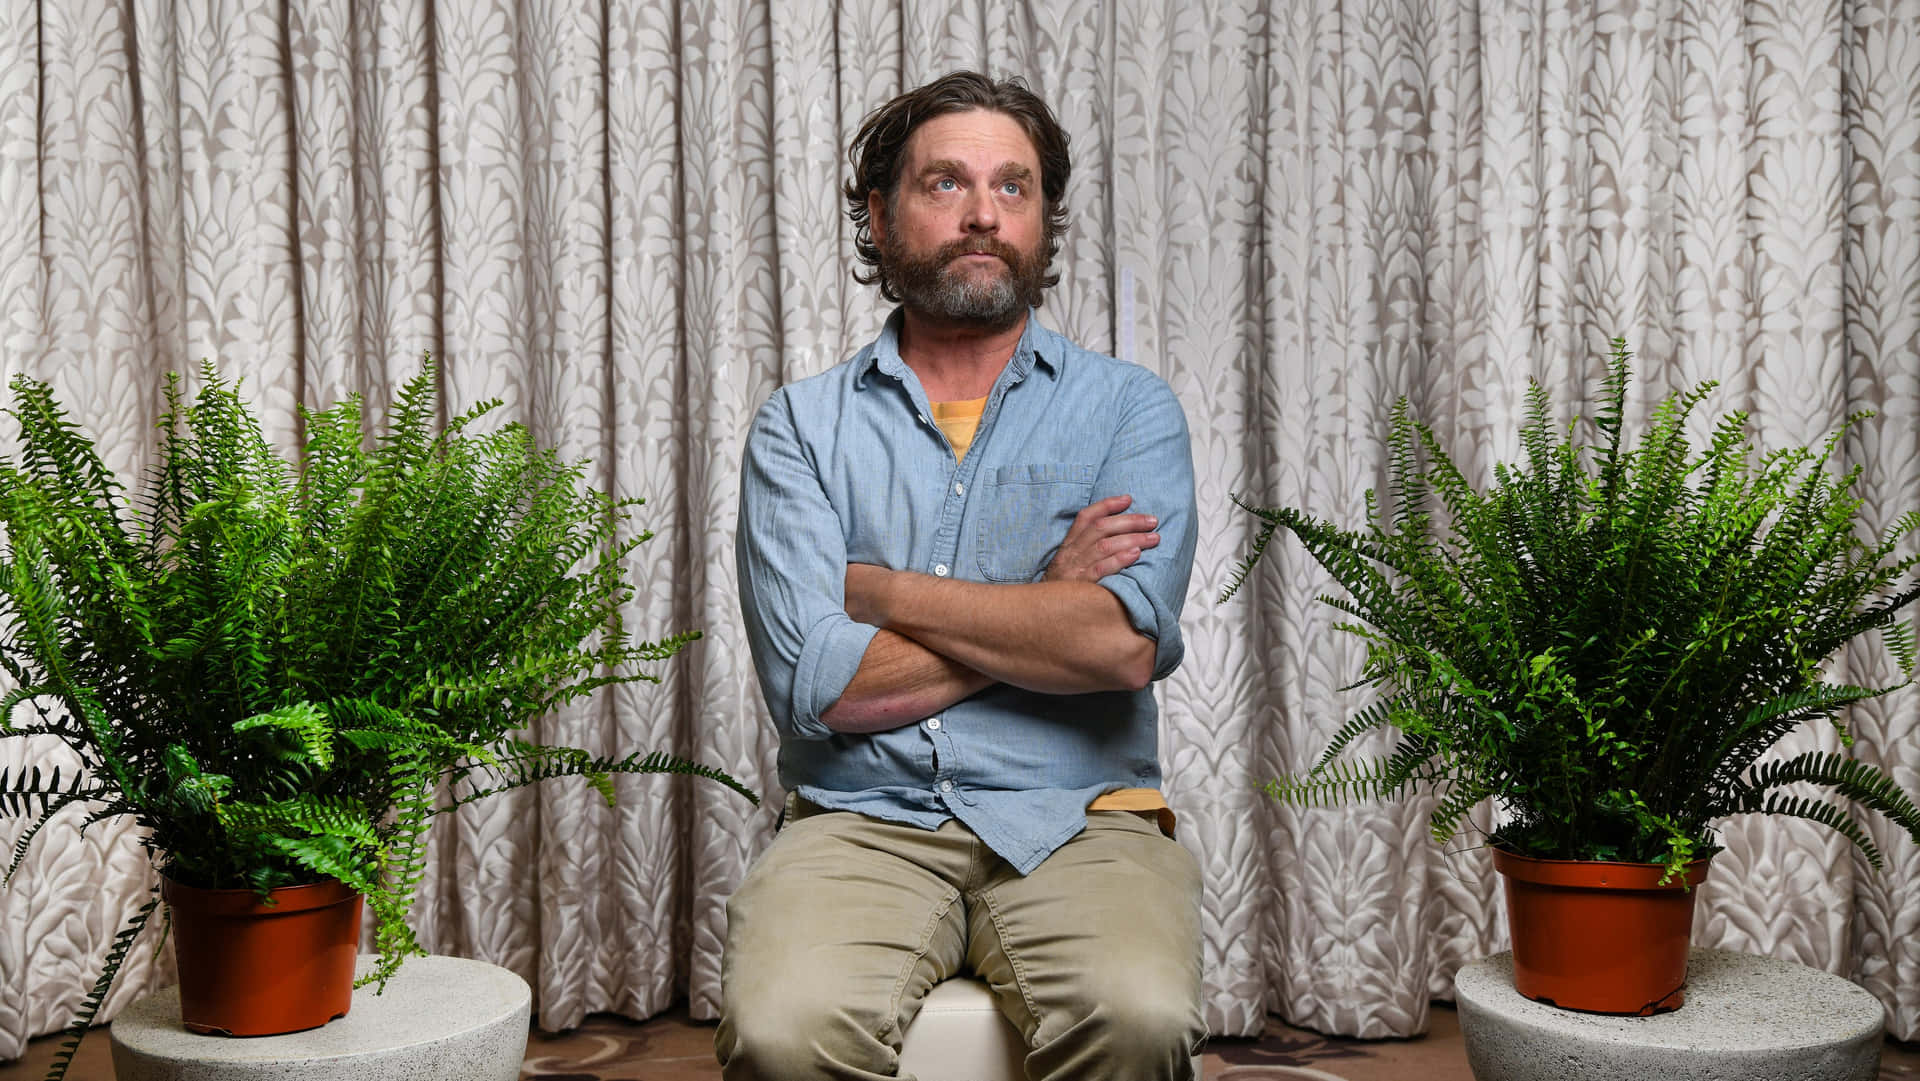 Zach Galifianakis in his most iconic role Wallpaper